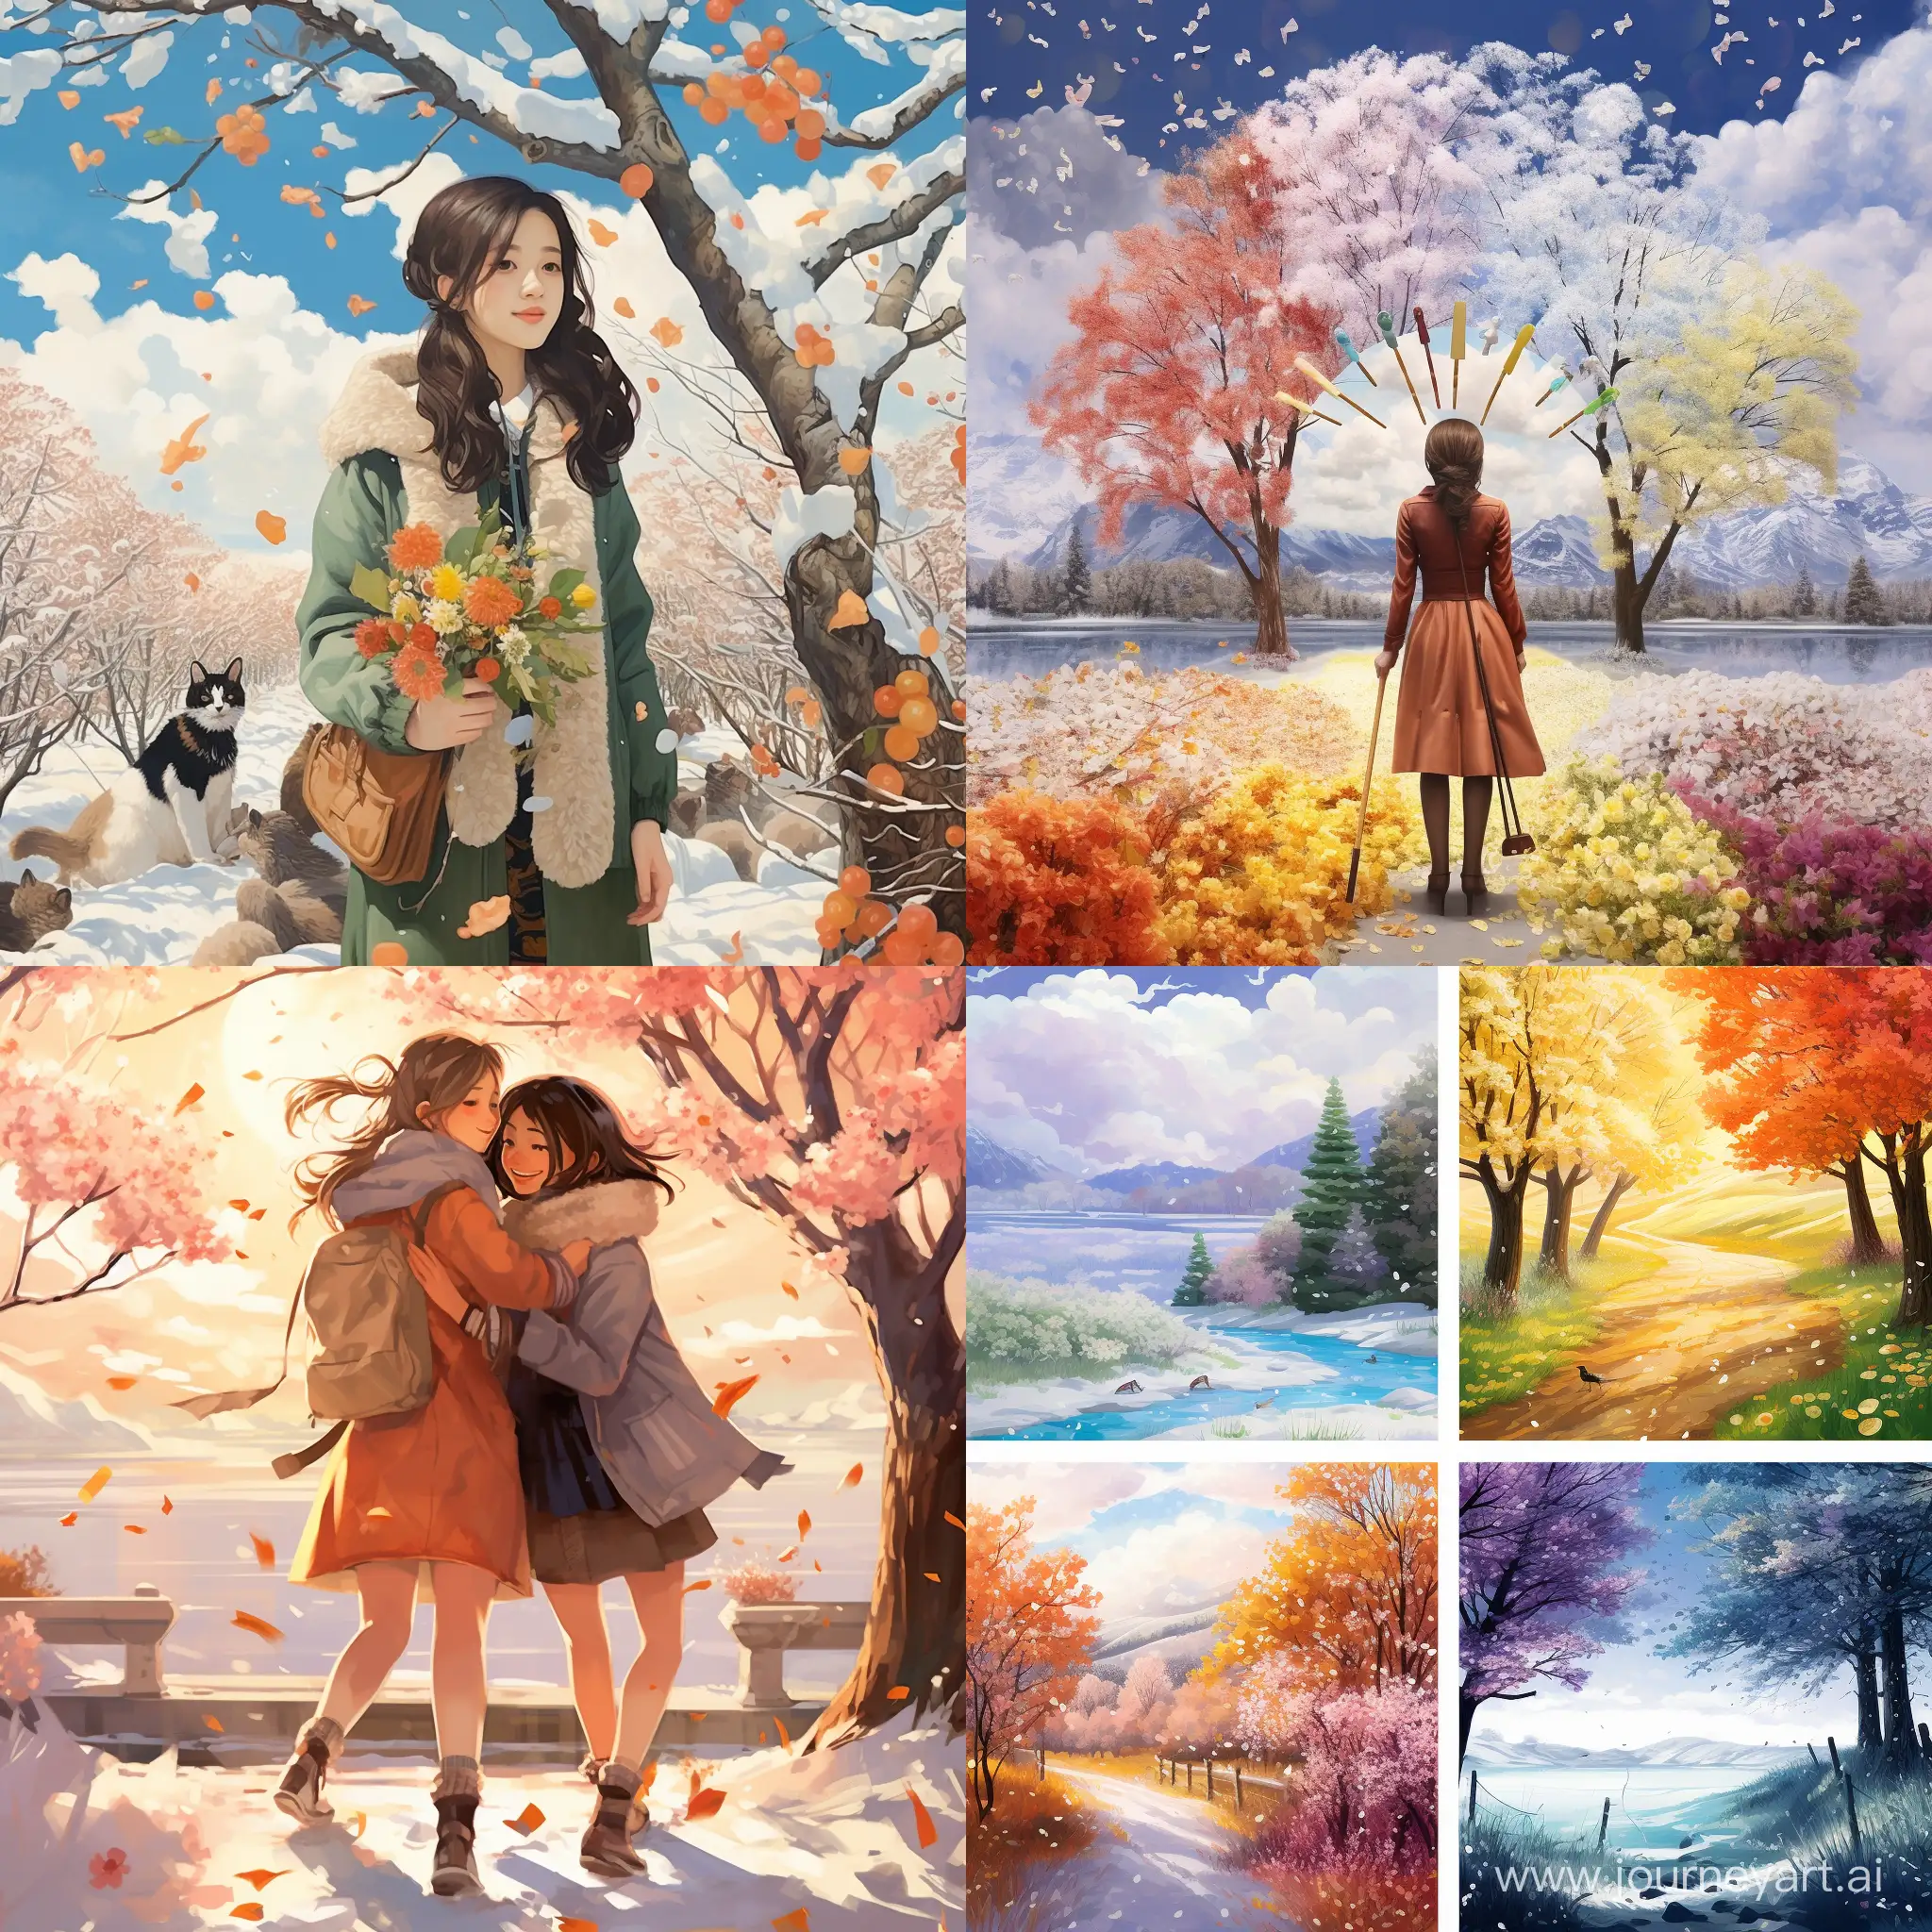 1.1) 4 seasons, (spring:1.2), (summer:1.3), (autumn:1.4), (winter:1.5), warm and happy atmosphere, blooming flowers, green trees, colorful leaves, white snow, sunshine, smiling people, wearing different clothes according to the season, full body,

